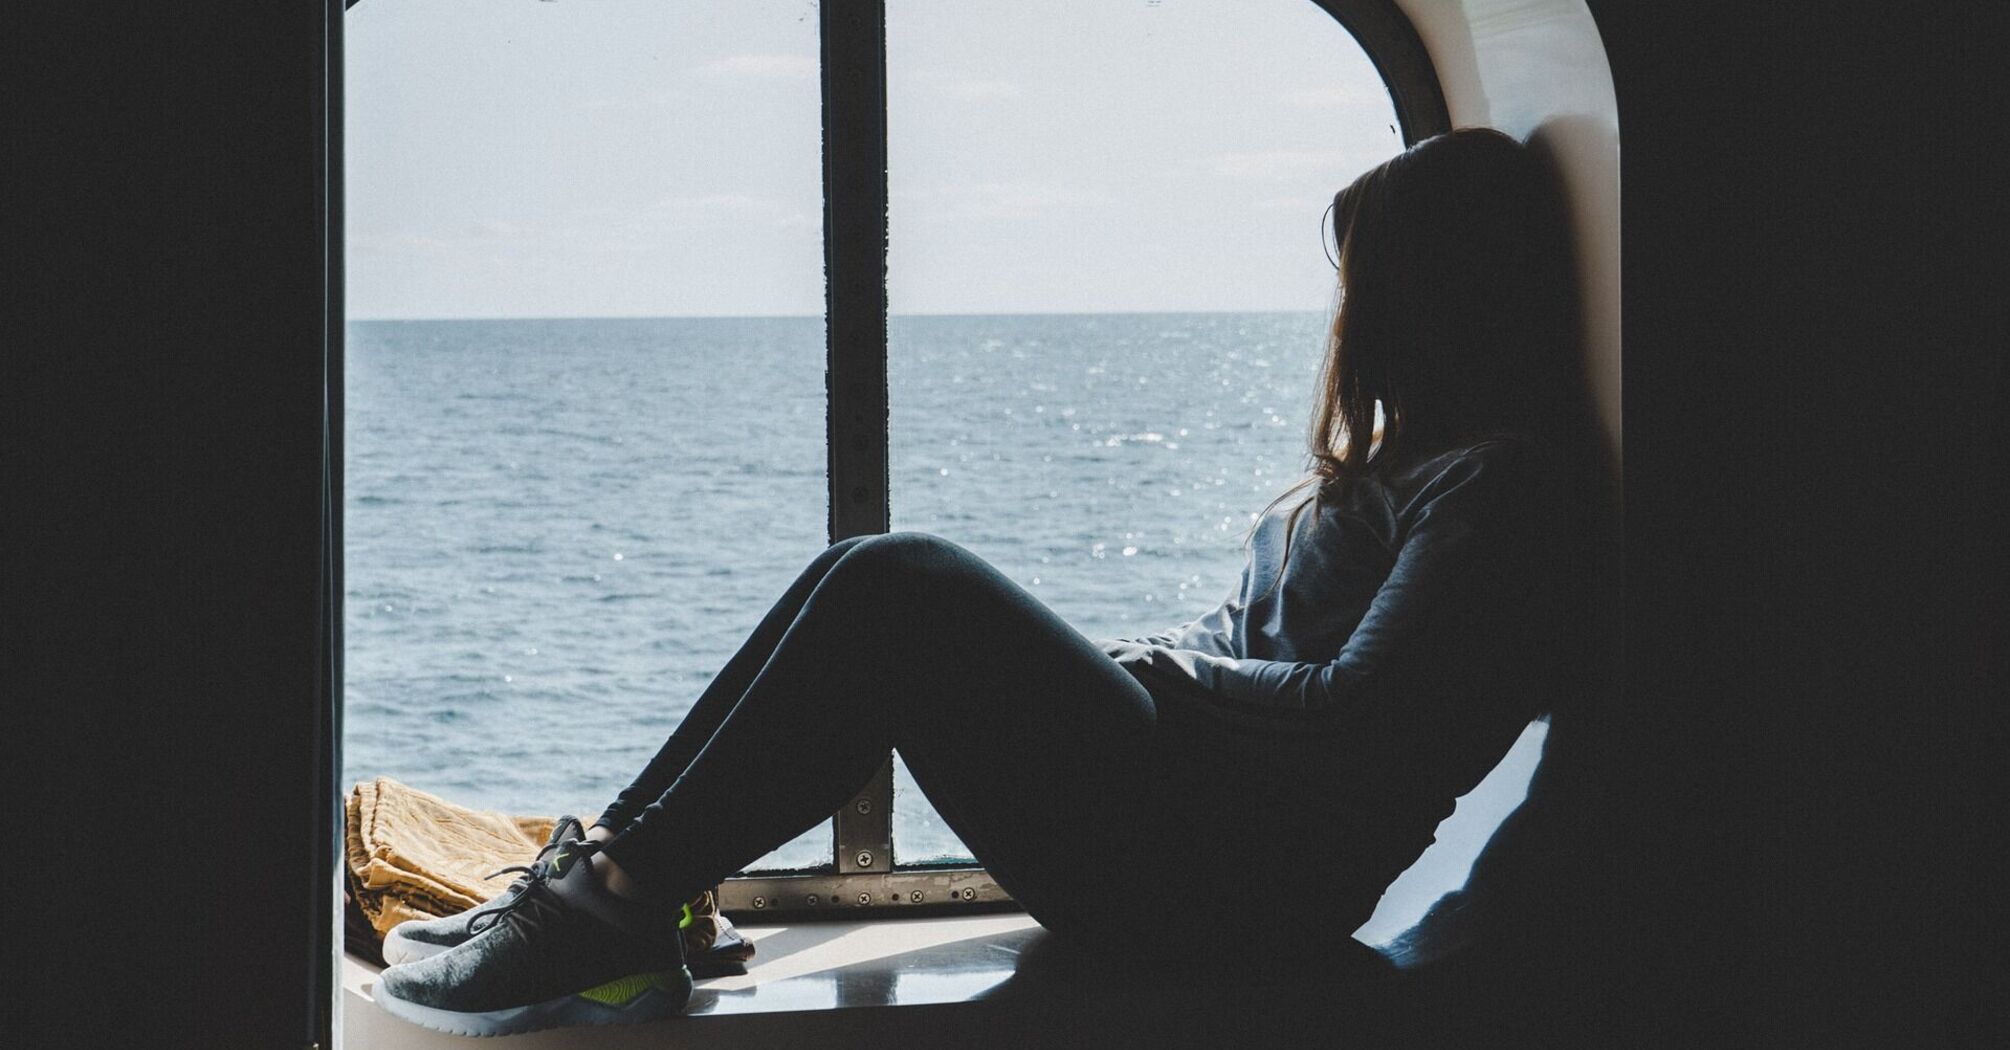 FBI reports a staggering number of rapes on cruises in recent years